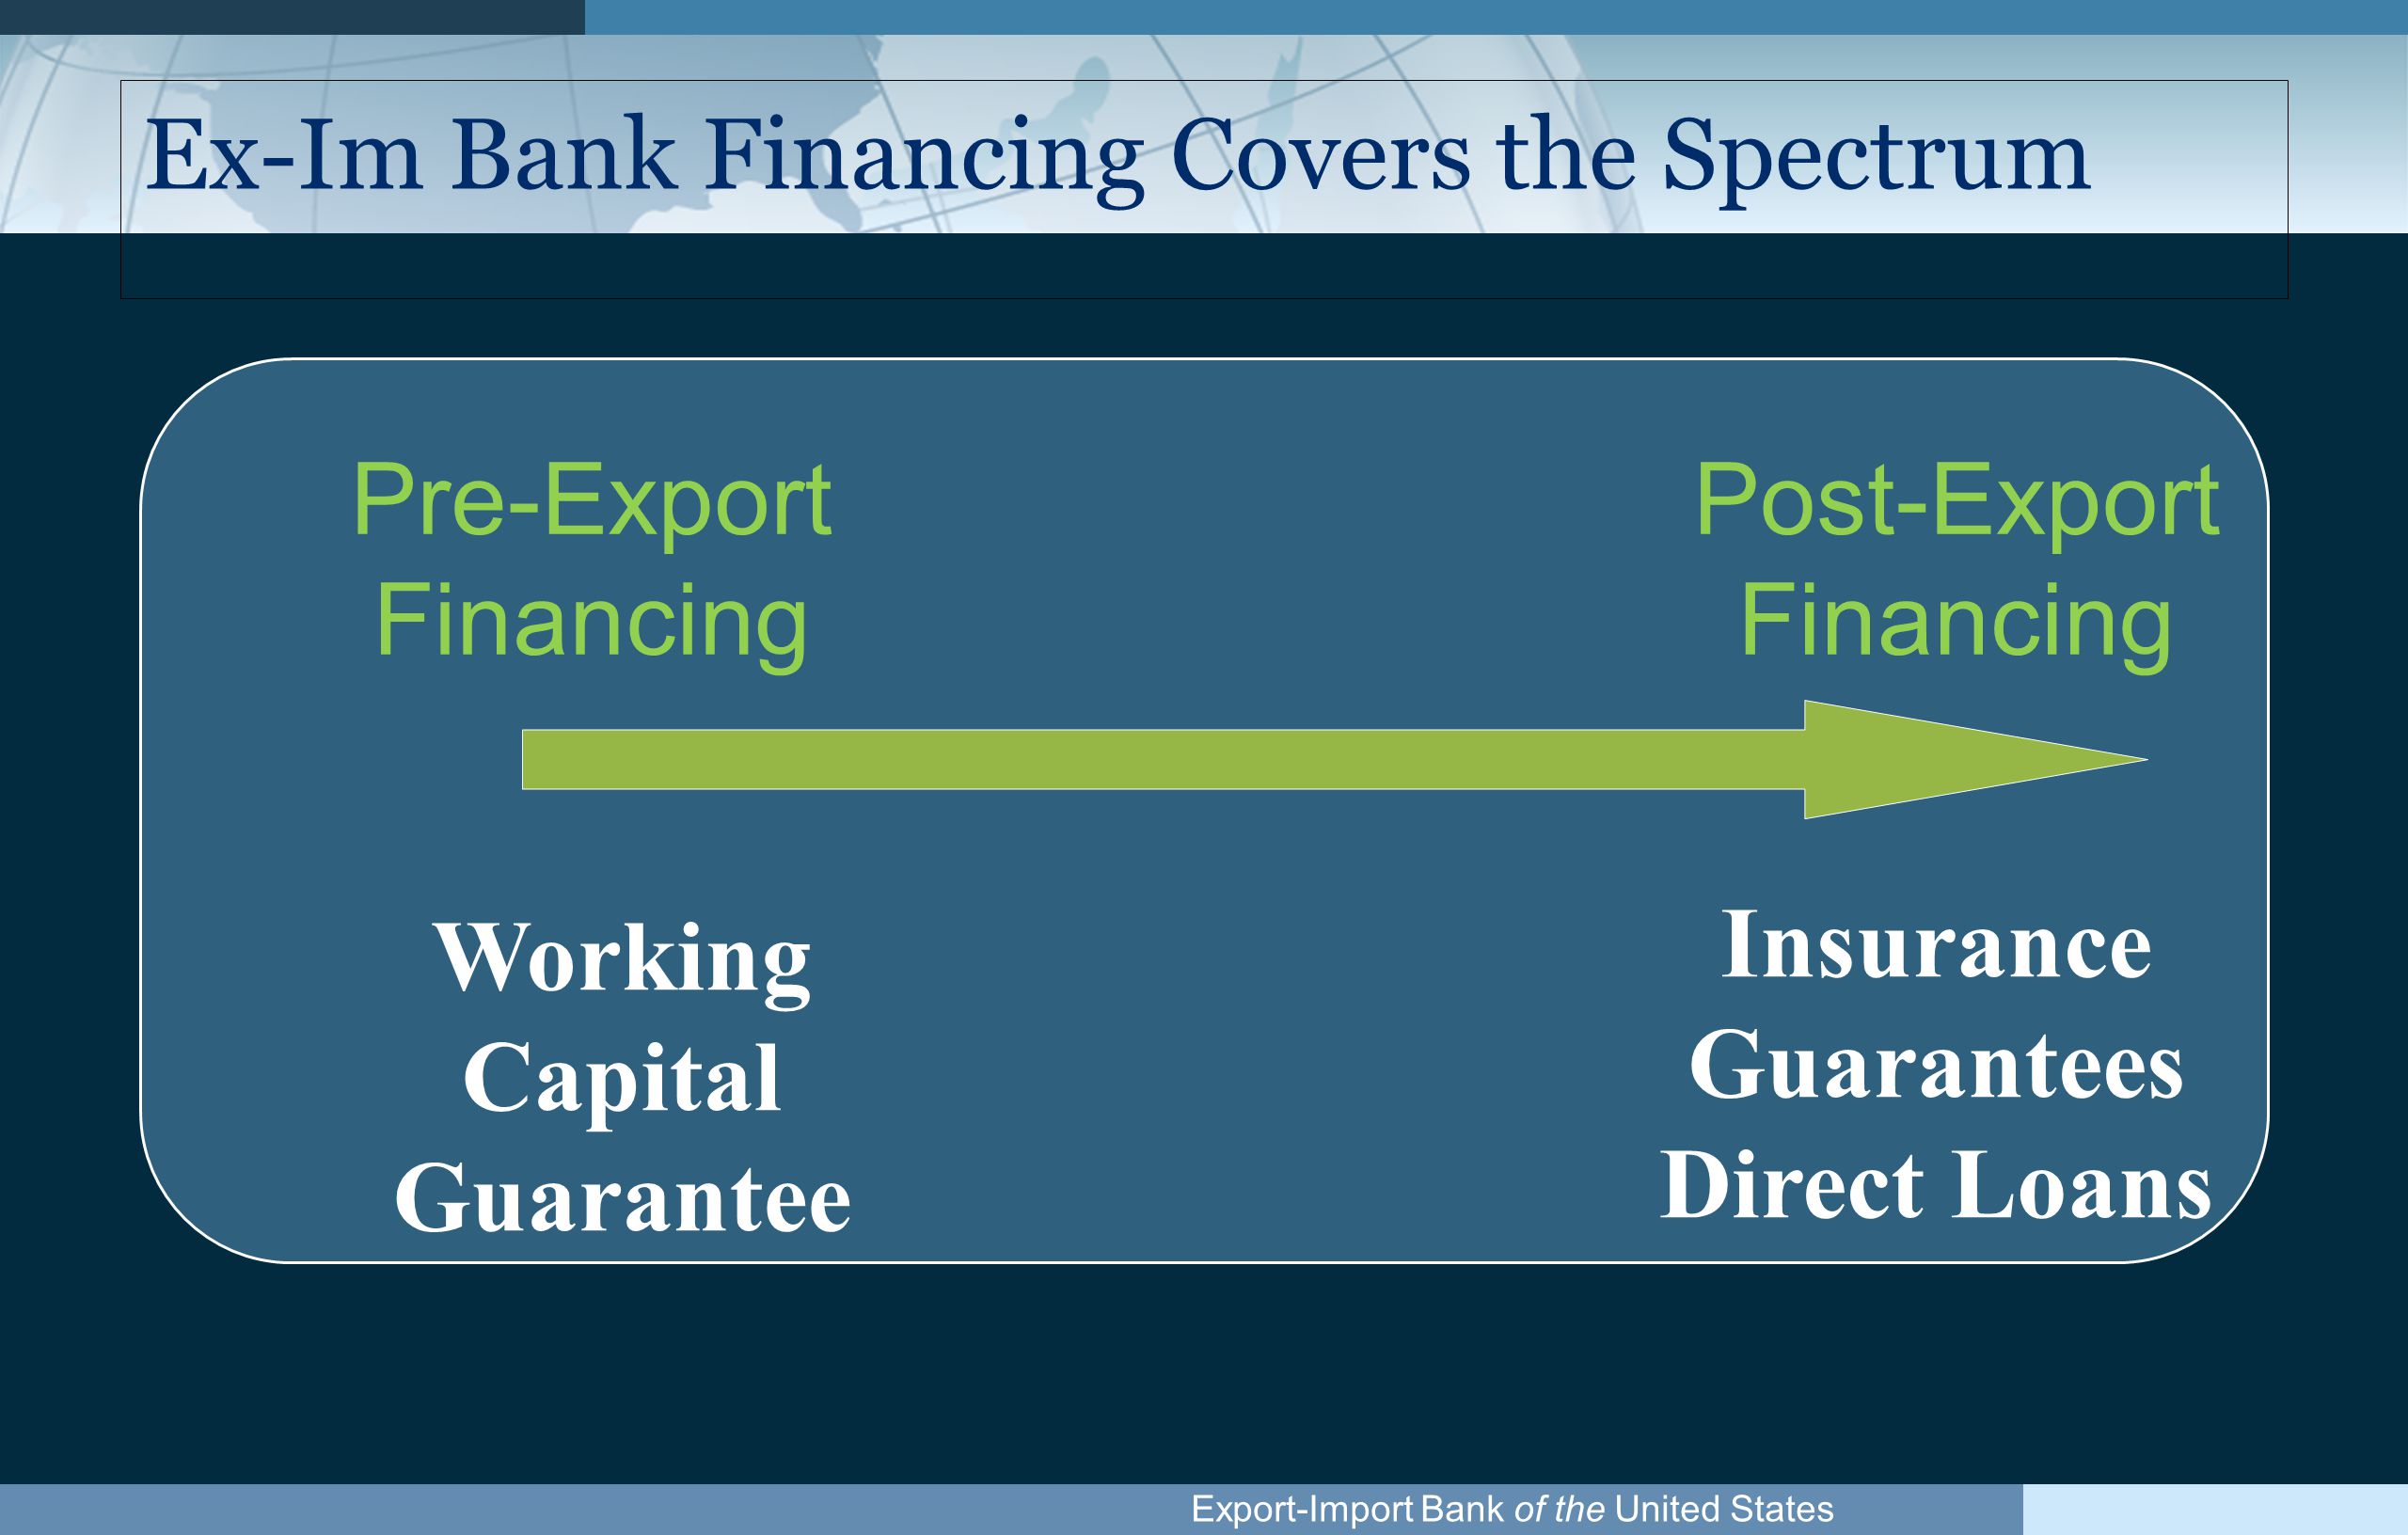 Export-Import Bank of the United States Ex-Im Bank Financing Covers the Spectrum Pre-Export Financing Post-Export Financing Working Capital Guarantee Insurance Guarantees Direct Loans